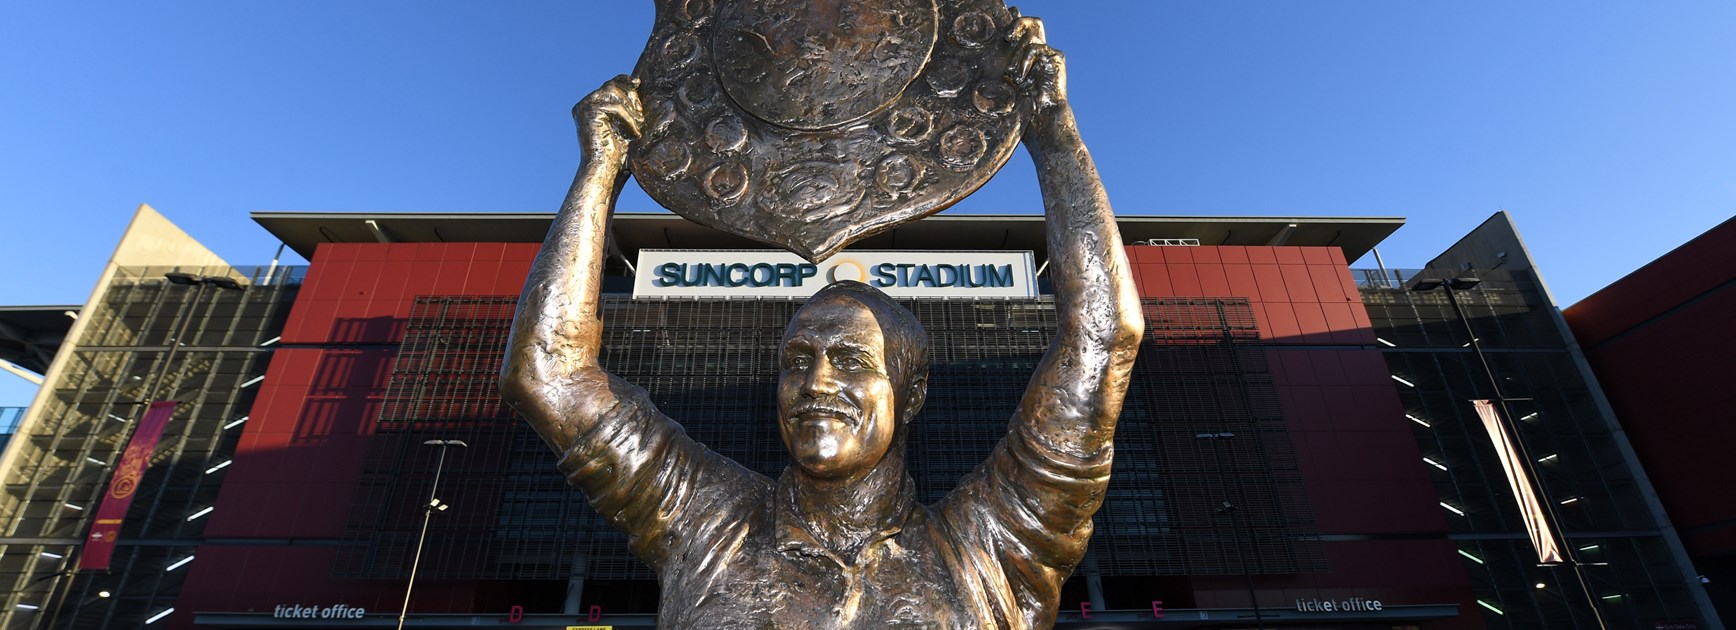 The Wally Lewis statue outside Suncorp Stadium